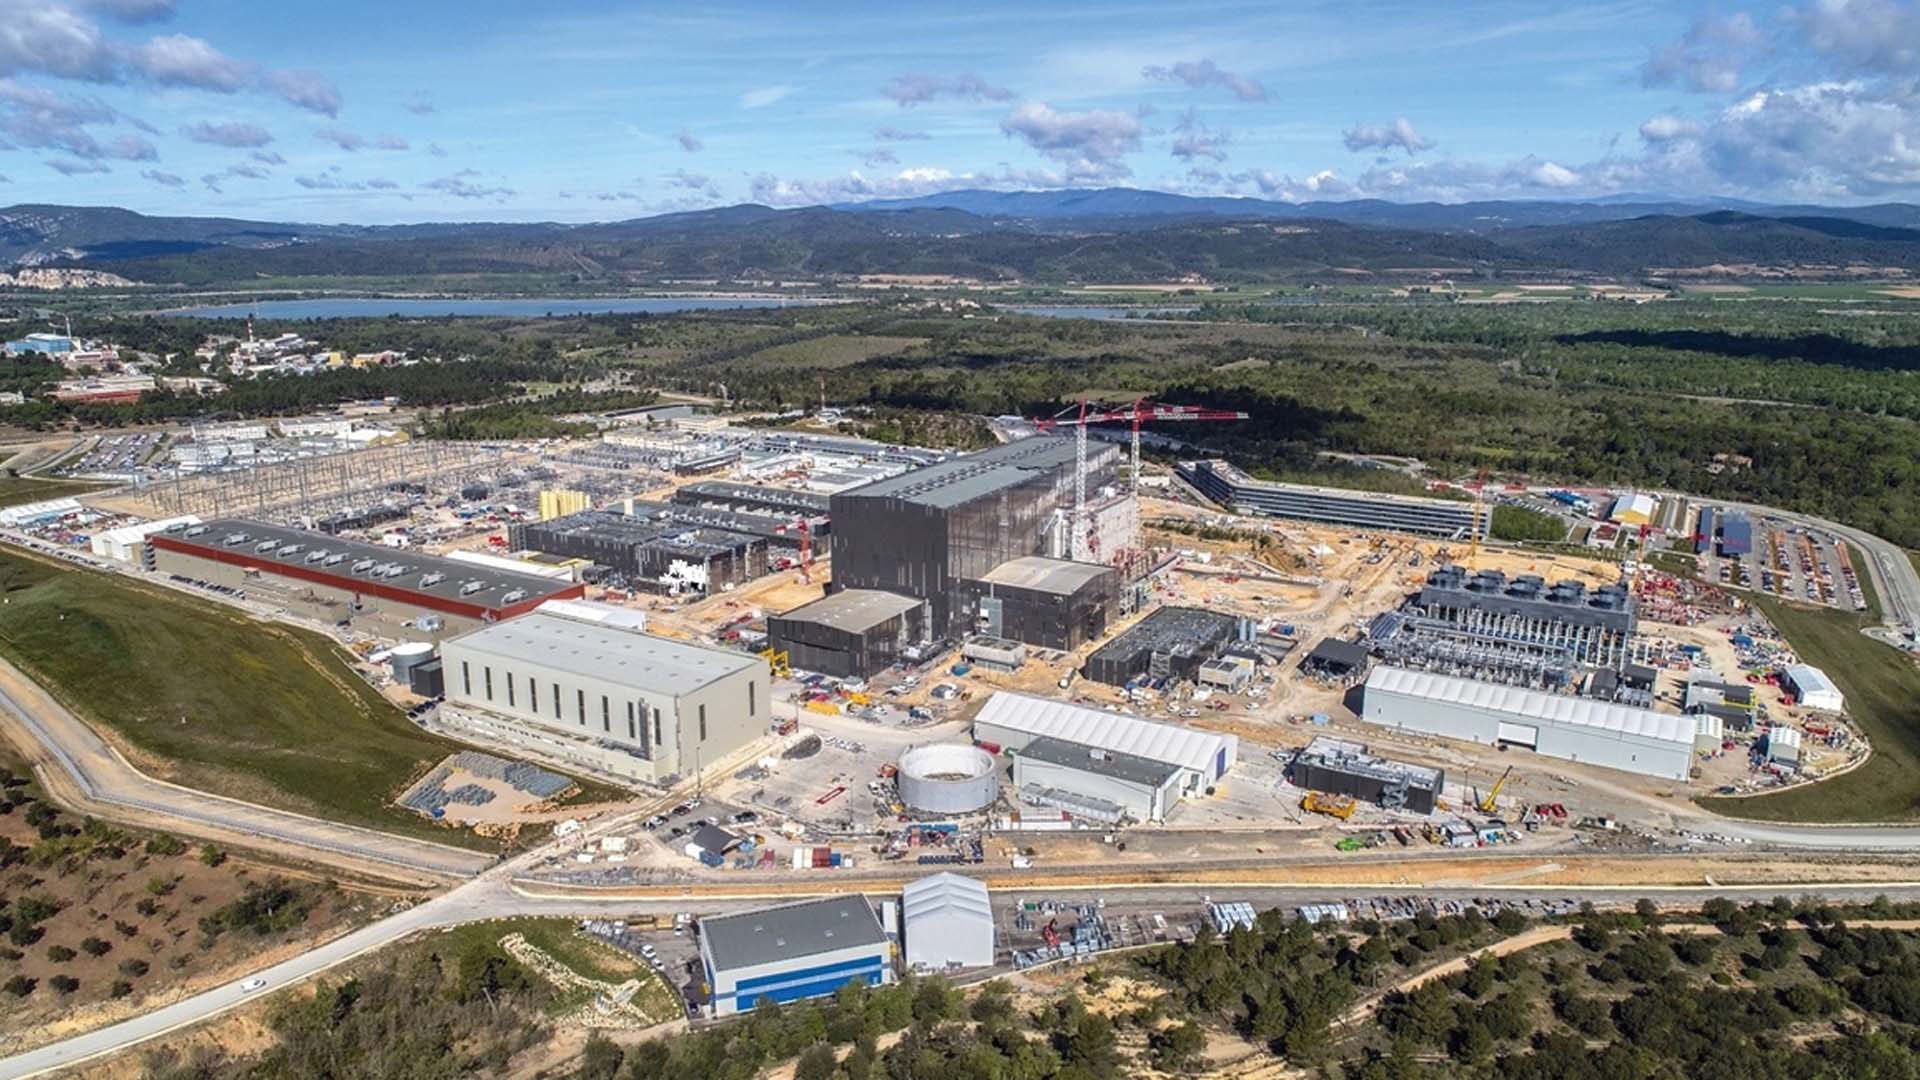 The ITER site in St. Paul-lez-Durance, France